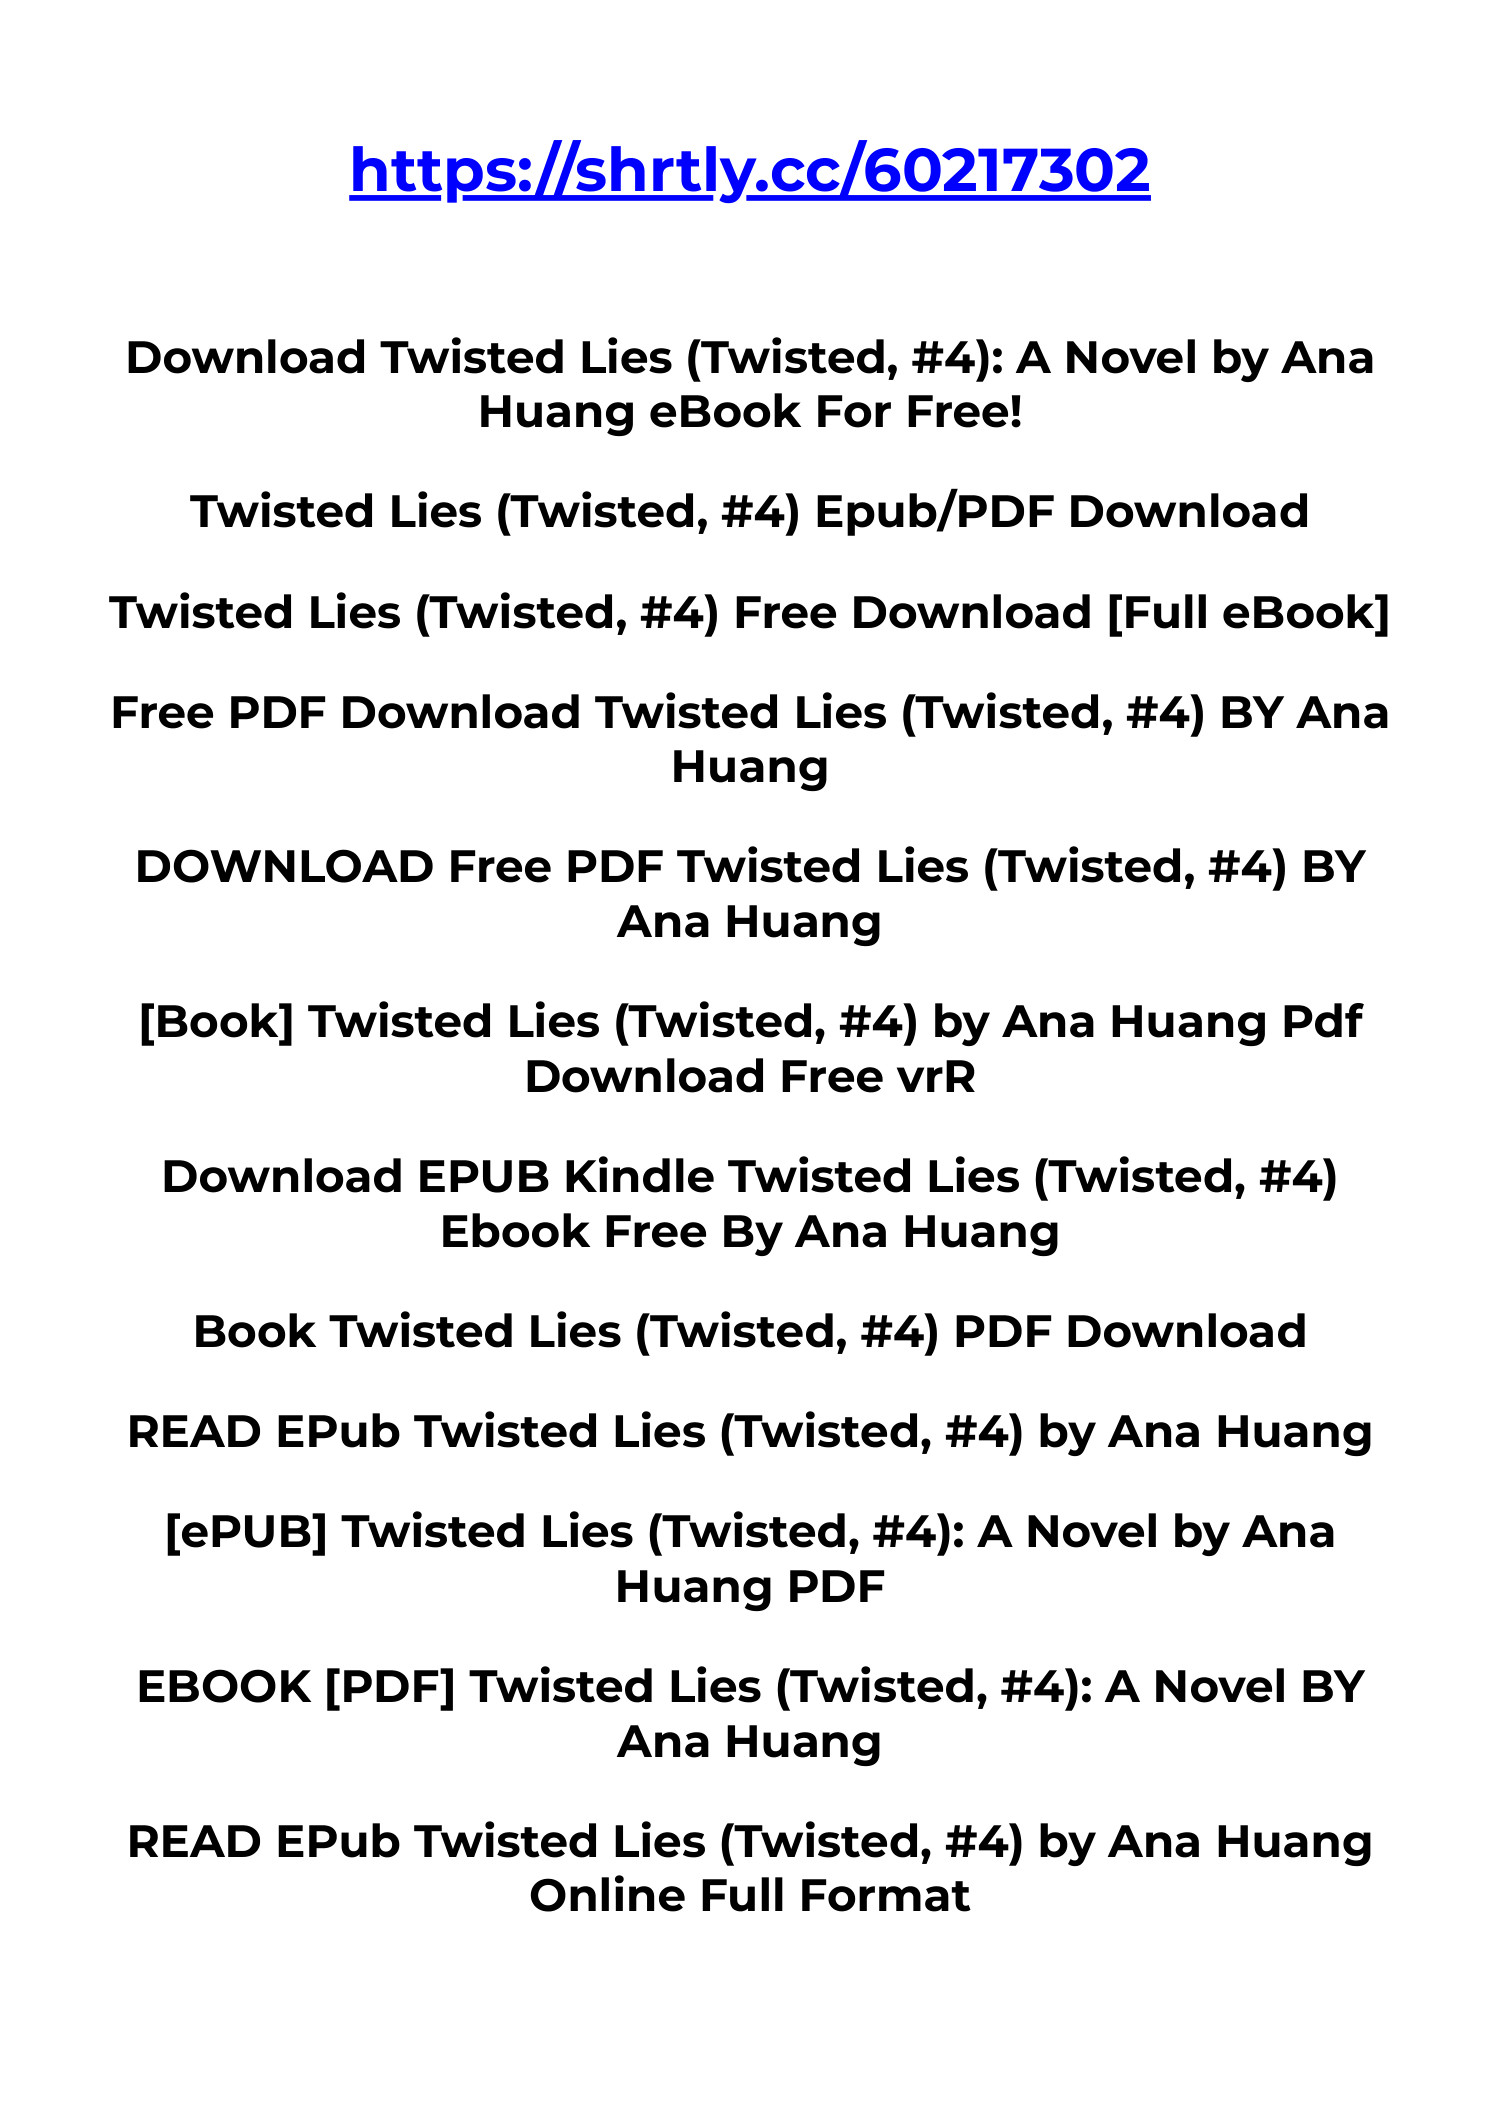 Download PDF Twisted Lies (Twisted, #4) Ebook Free By Ana Huang.pdf